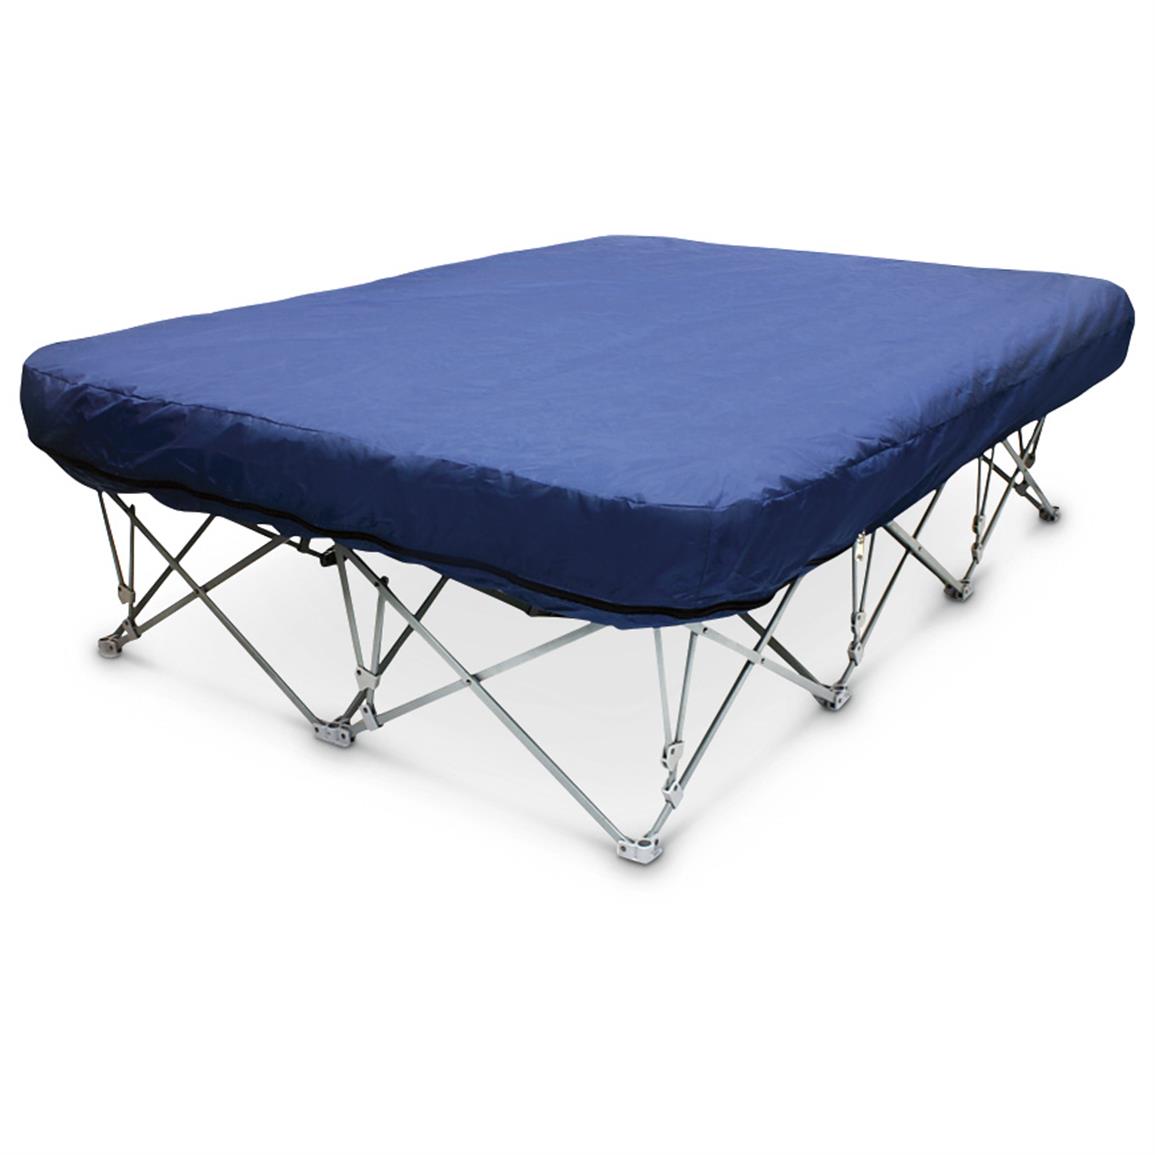 Twin Portable Airbed - 621936, Air Beds at Sportsman's Guide